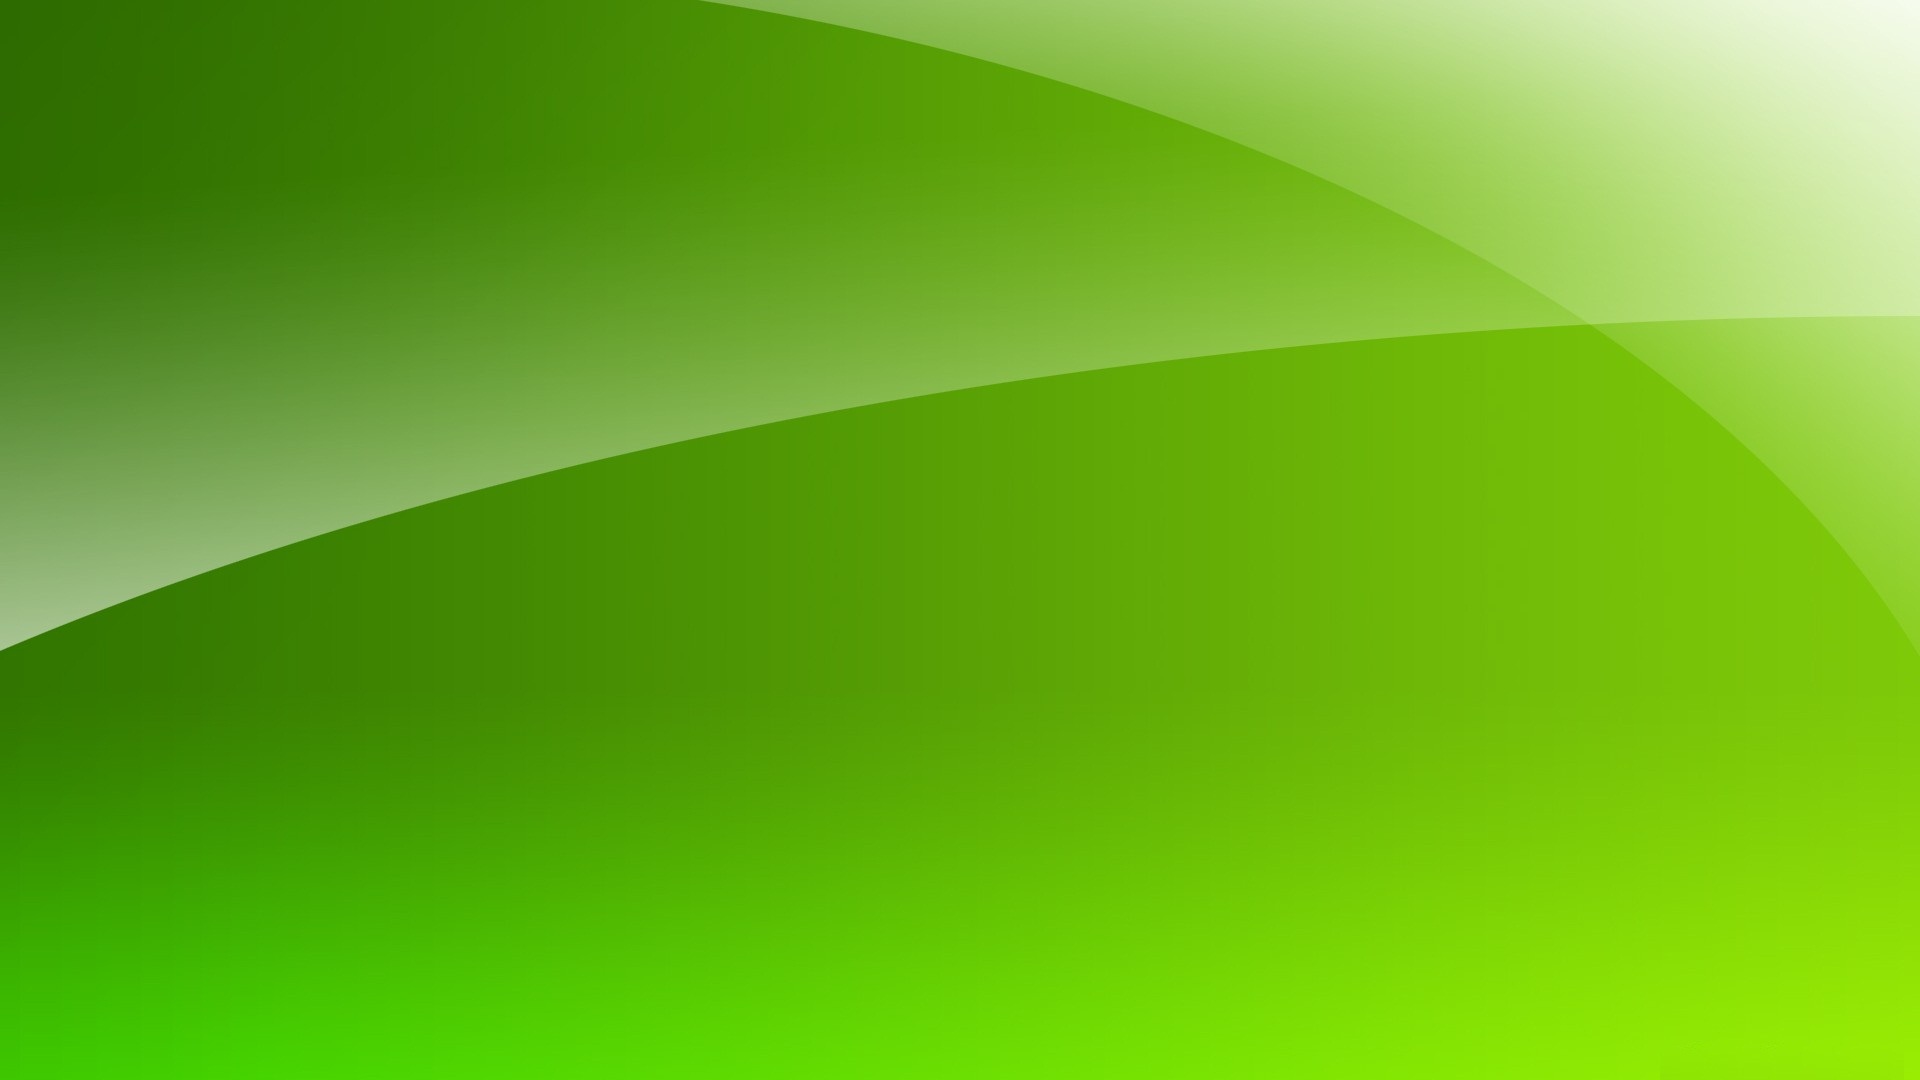 Lime Green Wallpaper For Desktop with resolution 1920X1080 pixel. You can use this wallpaper as background for your desktop Computer Screensavers, Android or iPhone smartphones